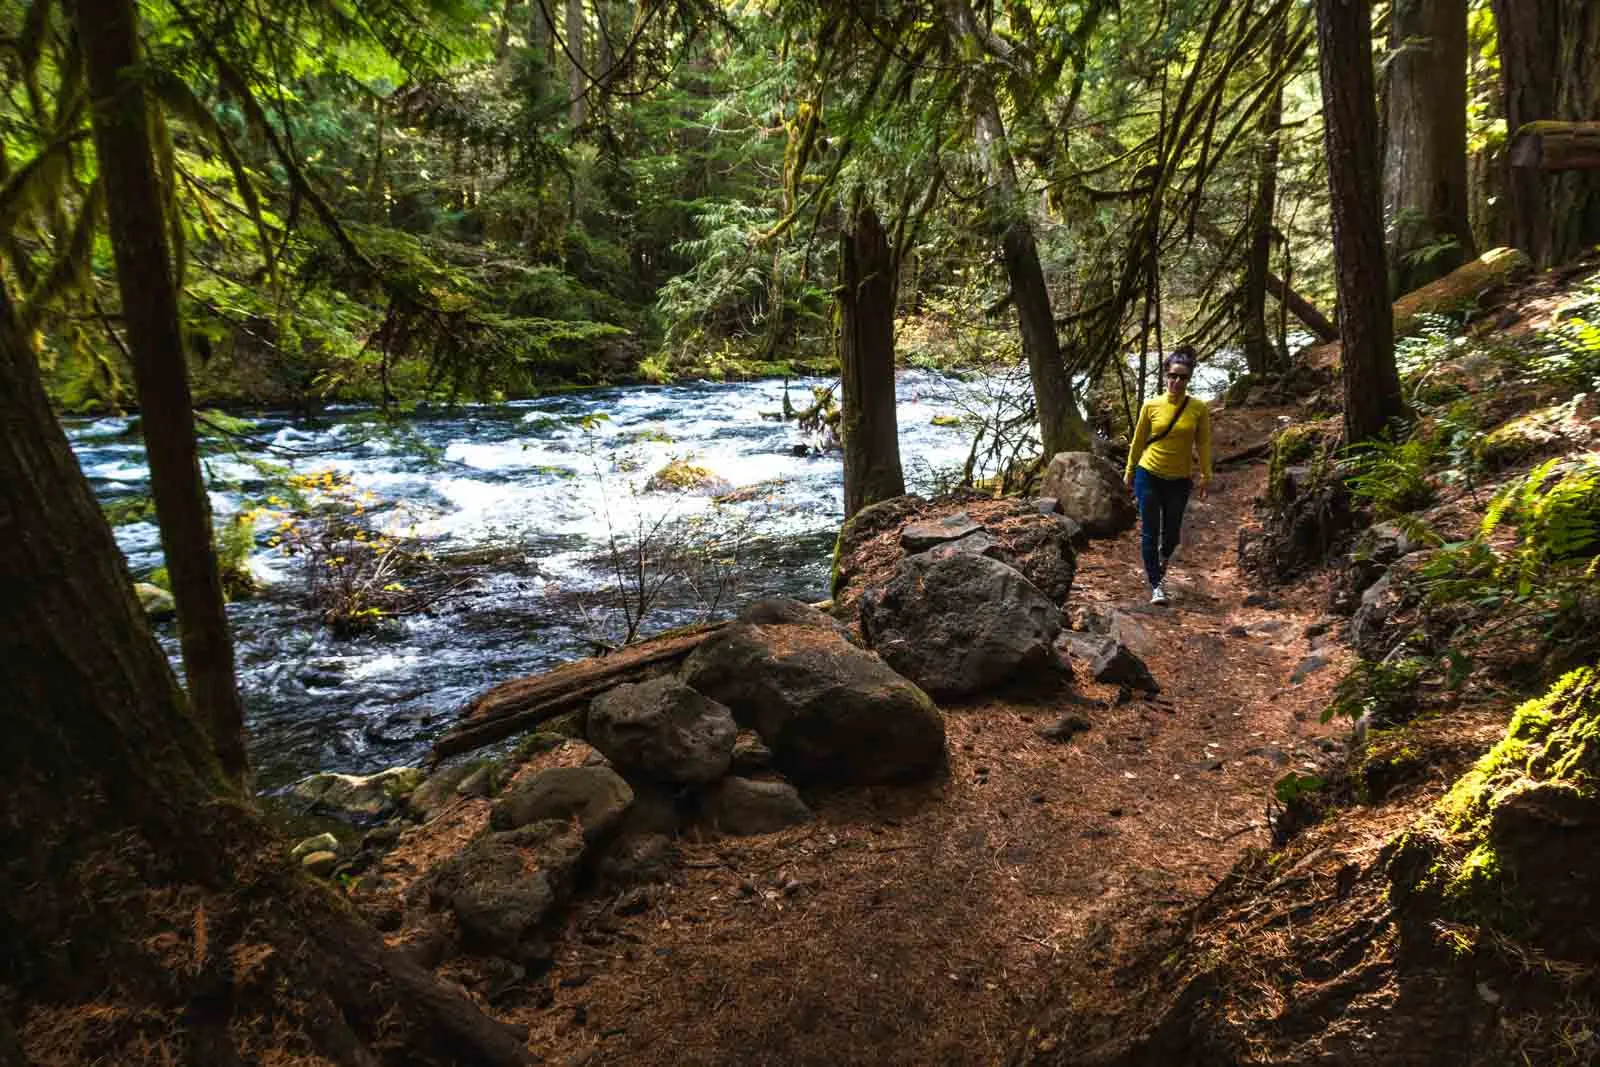 Blue Pool hike trail is a popular things to do in Oregon